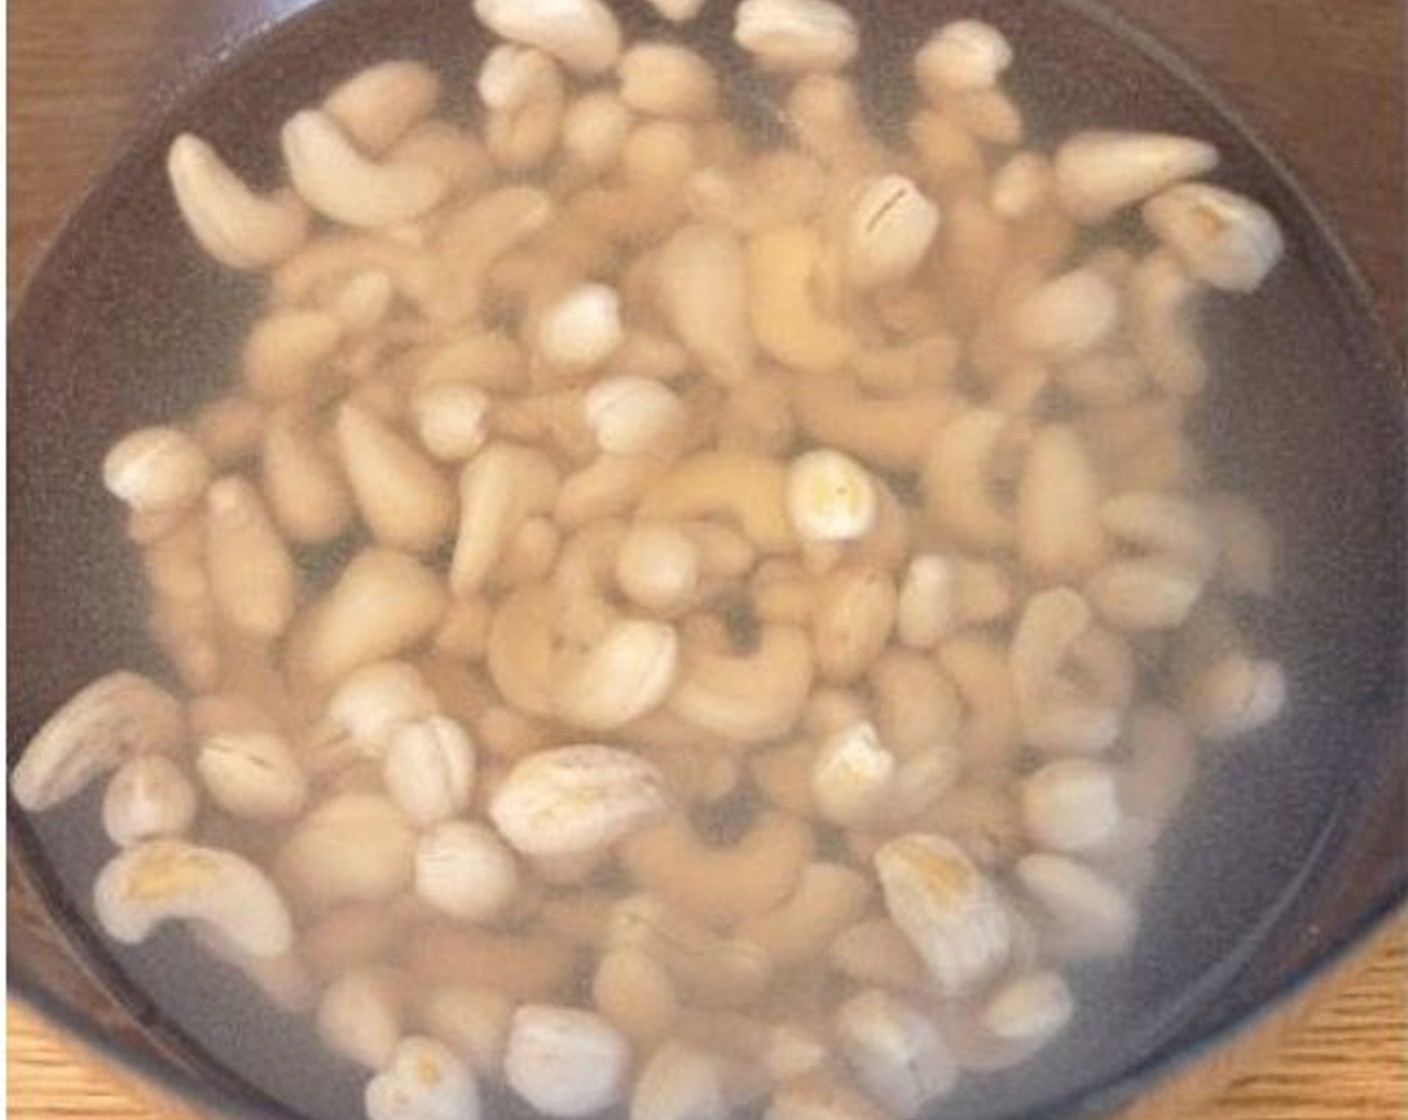 step 1 Soak the Raw Cashews (2 cups) in boiling hot water for 30 minutes, or in lukewarm water overnight.